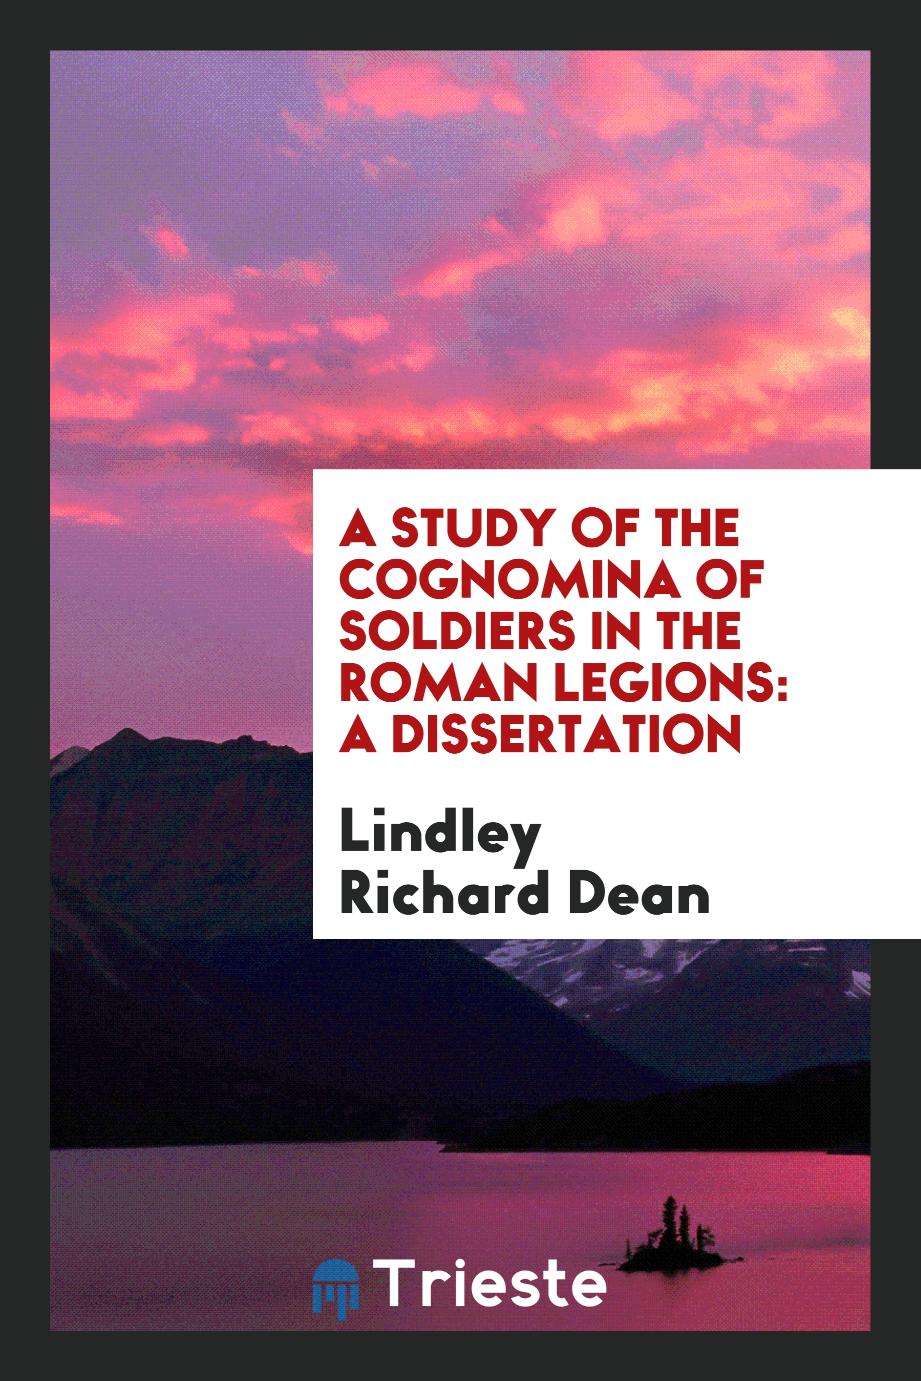 A Study of the Cognomina of Soldiers in the Roman Legions: A Dissertation